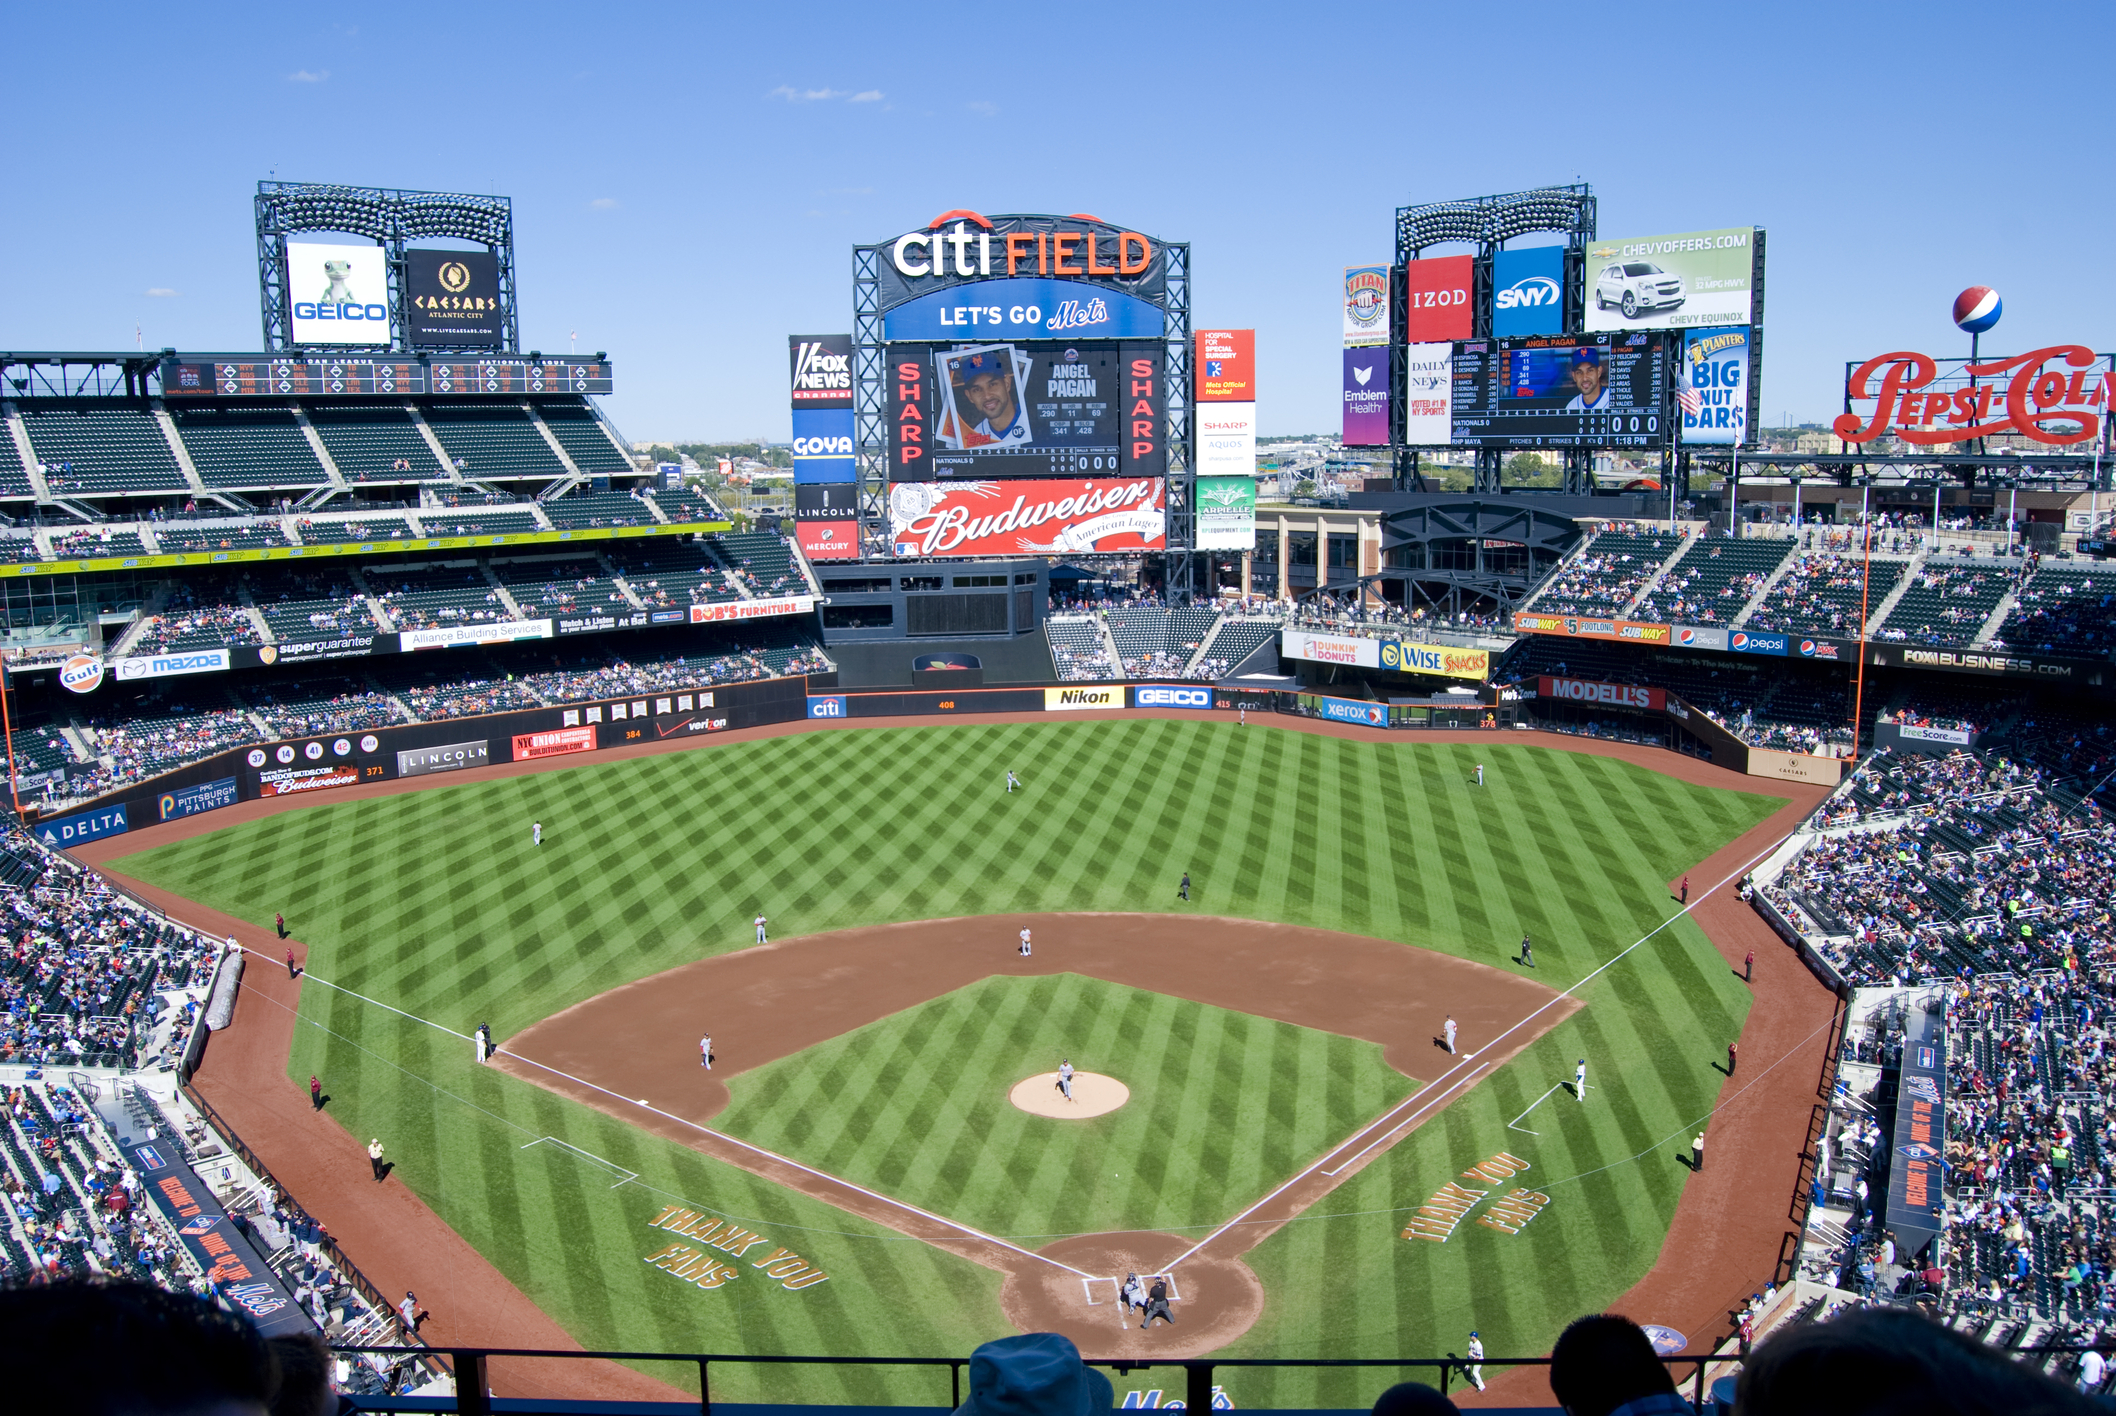 Citi Field on a sunny day with a blue sky and no clouds